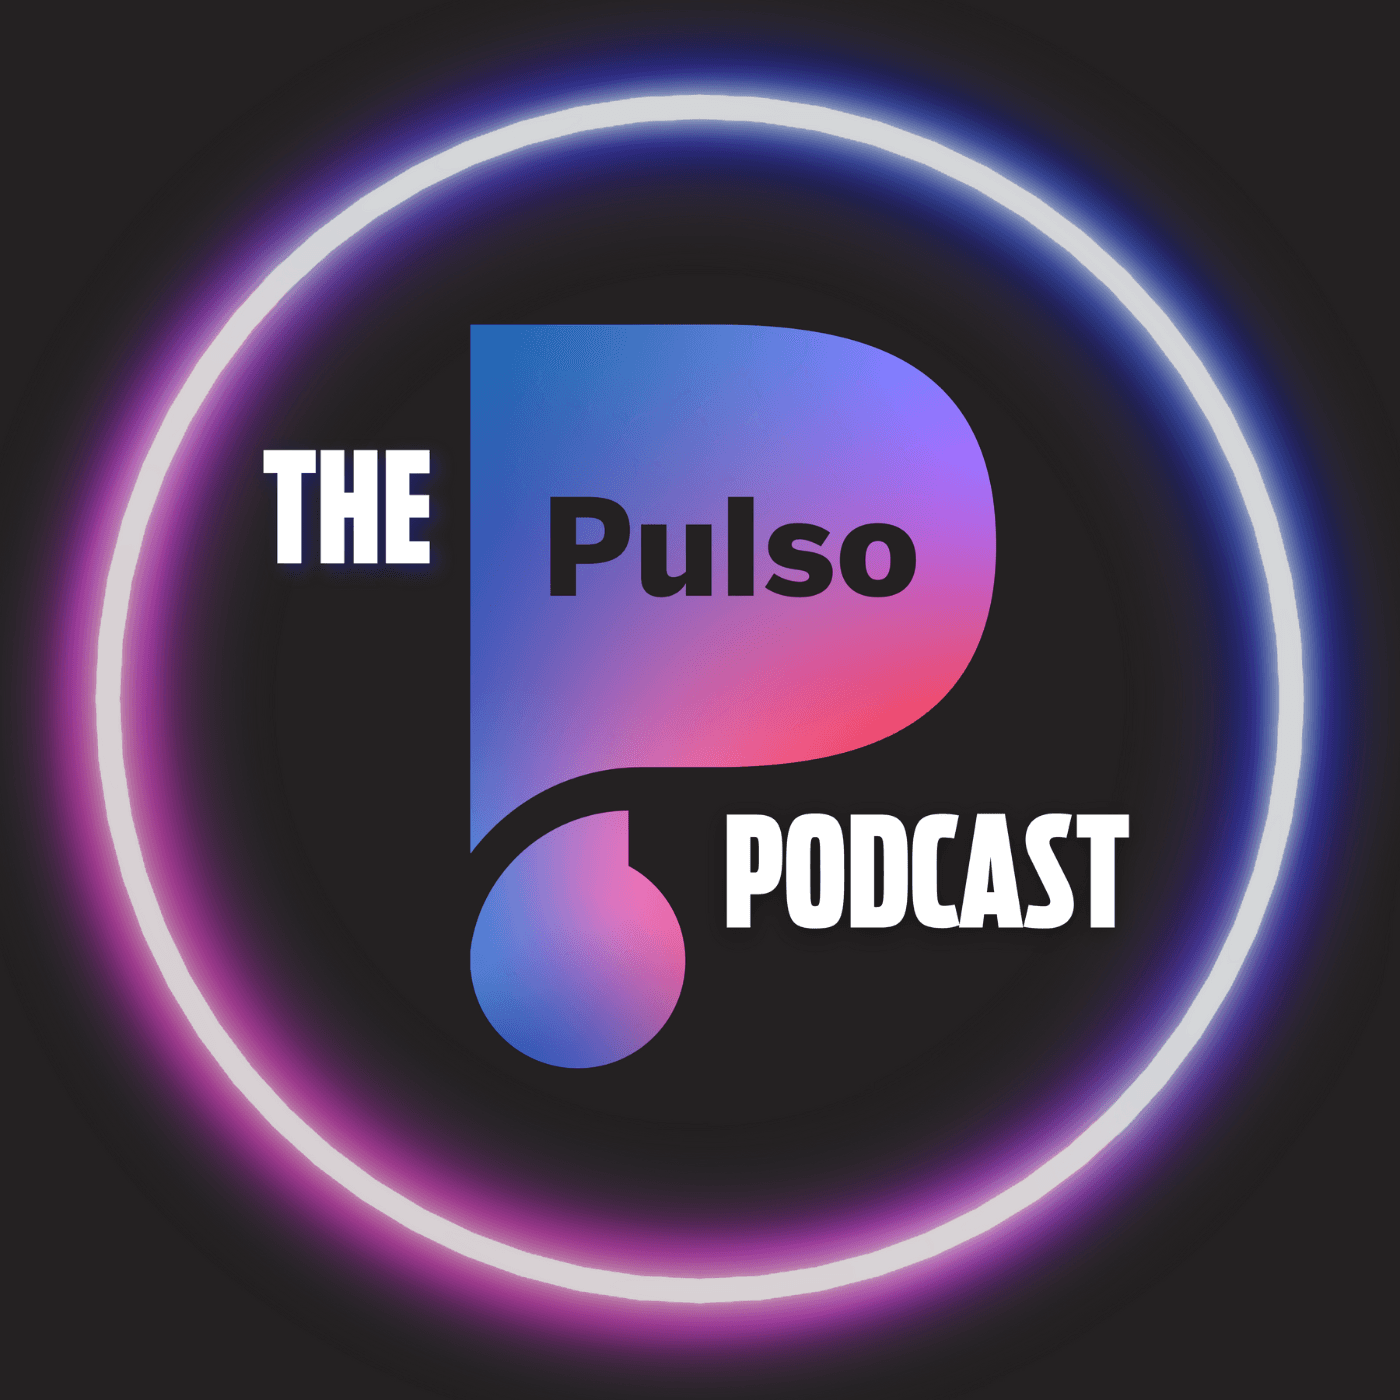 Thumbnail for "The Pulso Podcast".